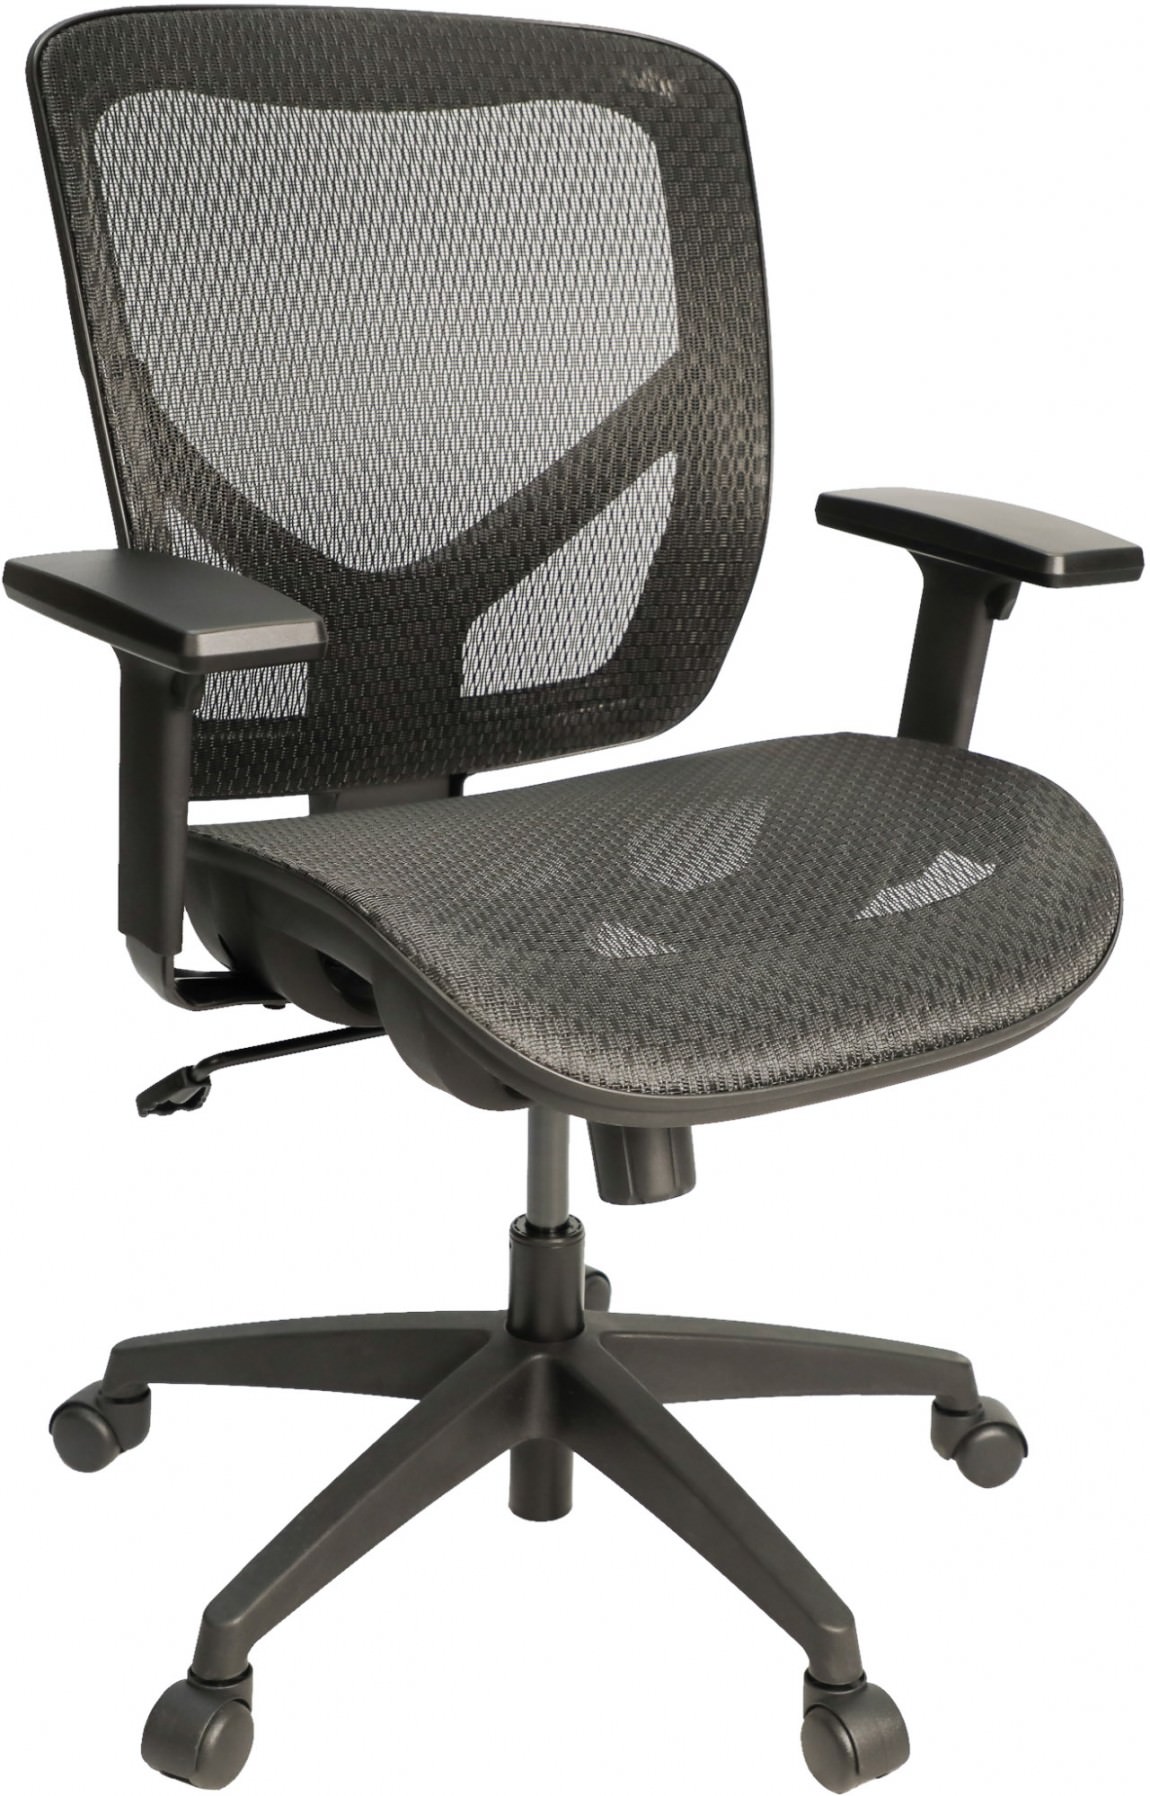 Full Mesh Office Chair : Atlantic : Express Office Furniture